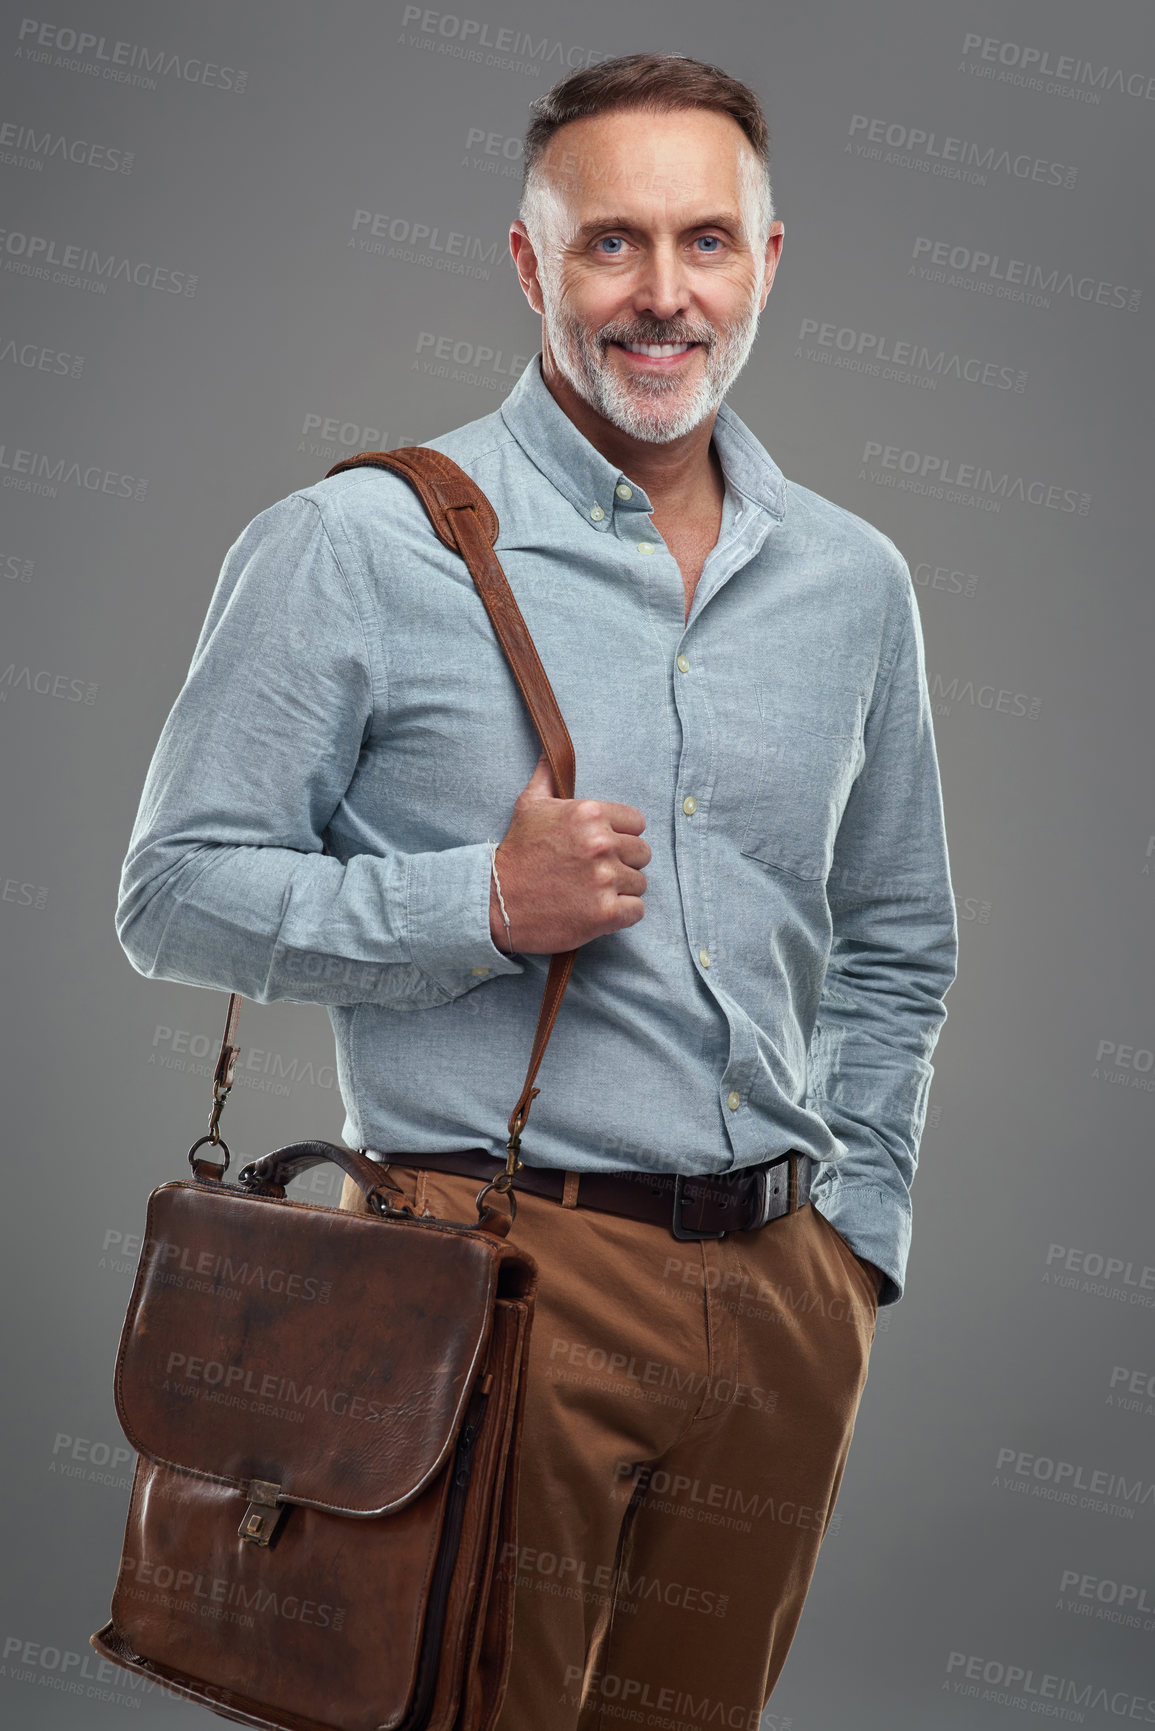 Buy stock photo Studio portrait of a mature man carrying a bag against a grey background